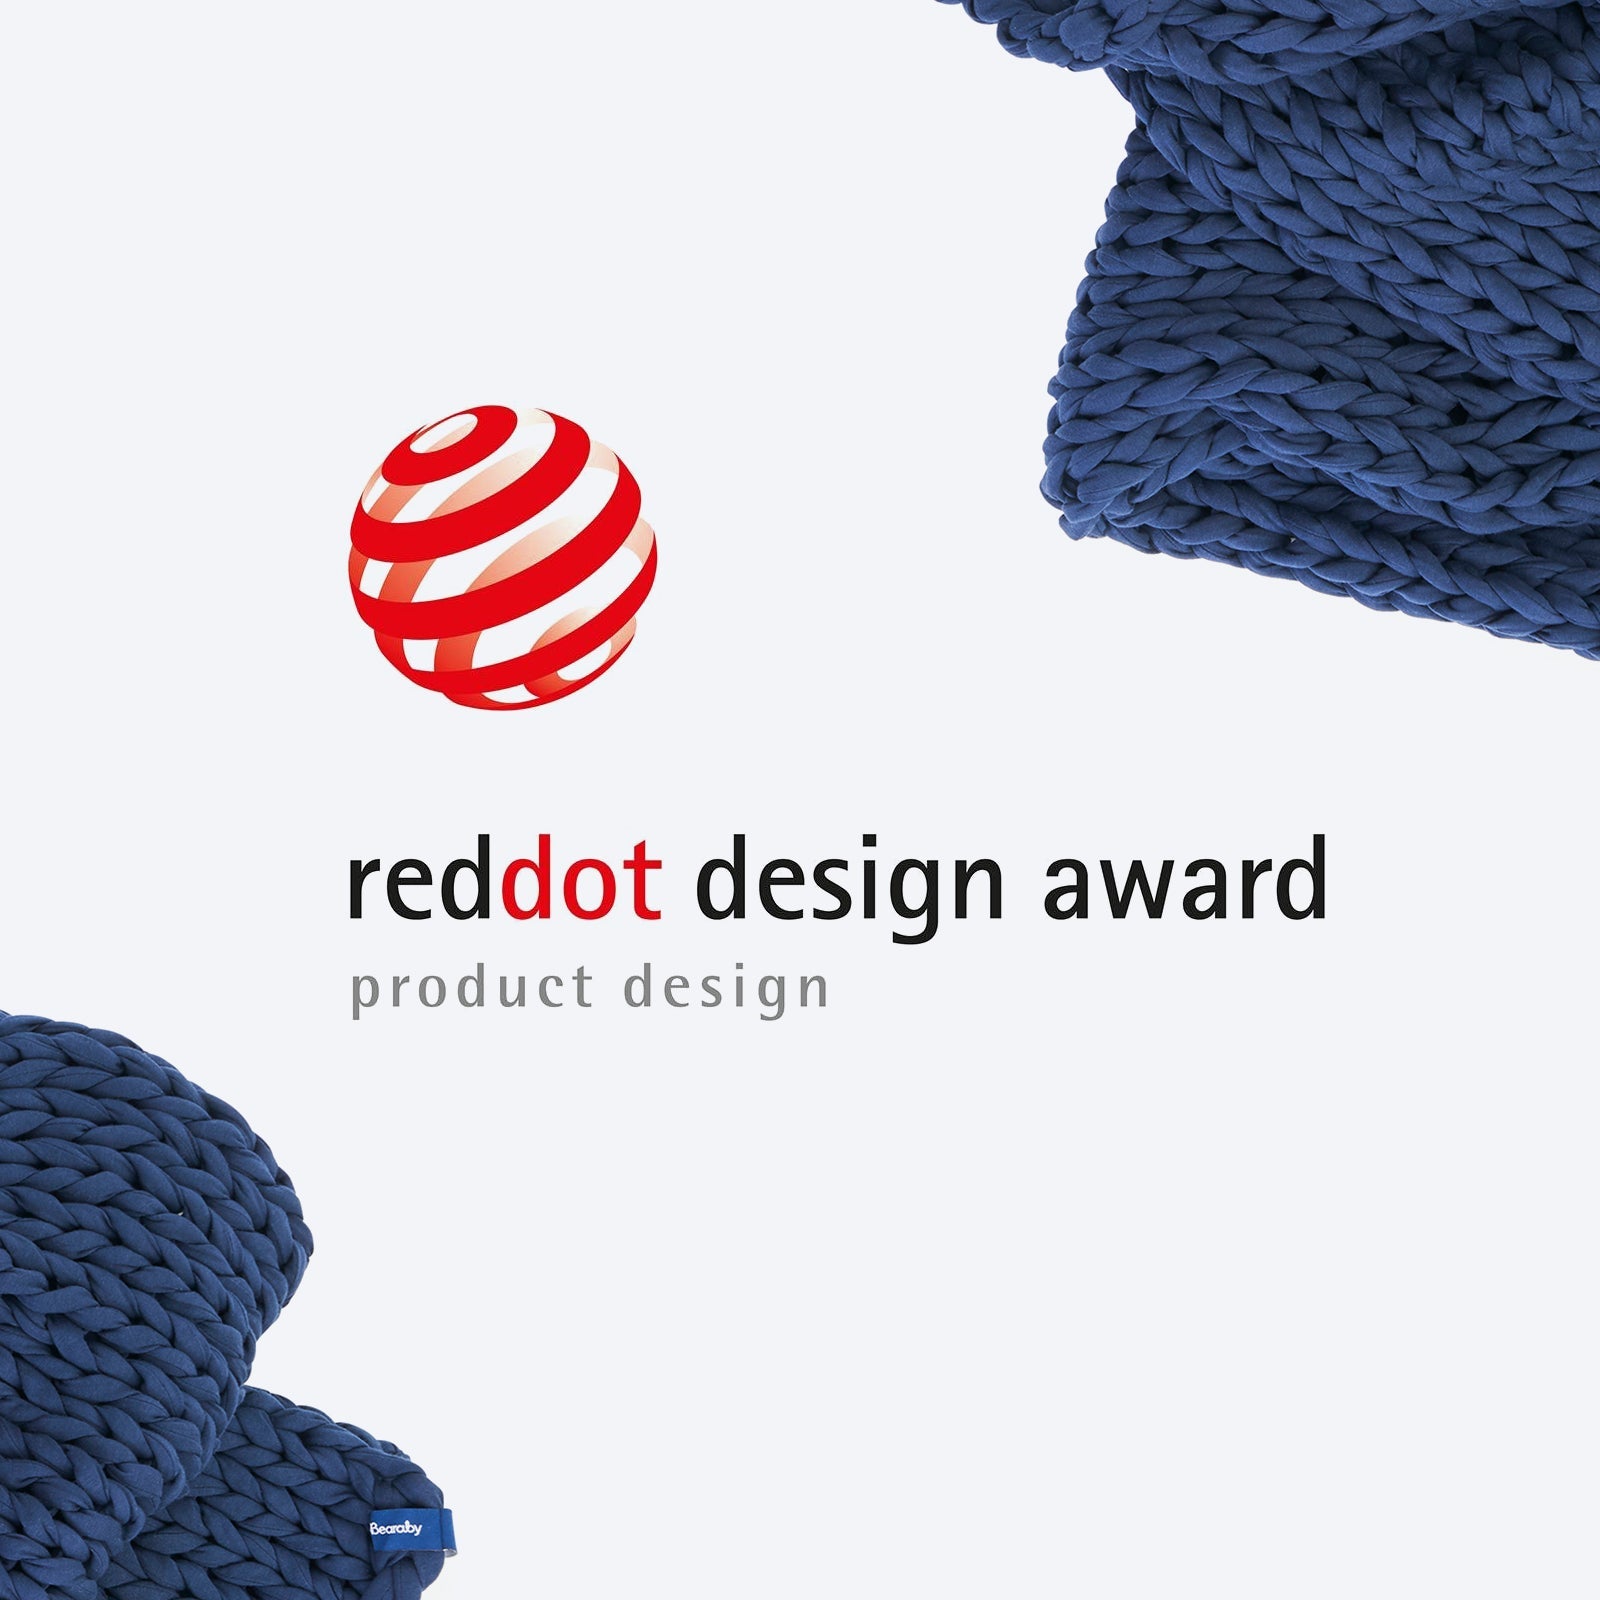 The Bearaby Weighted Blanket Is The Red Dot Award Winner In Product Design 2020